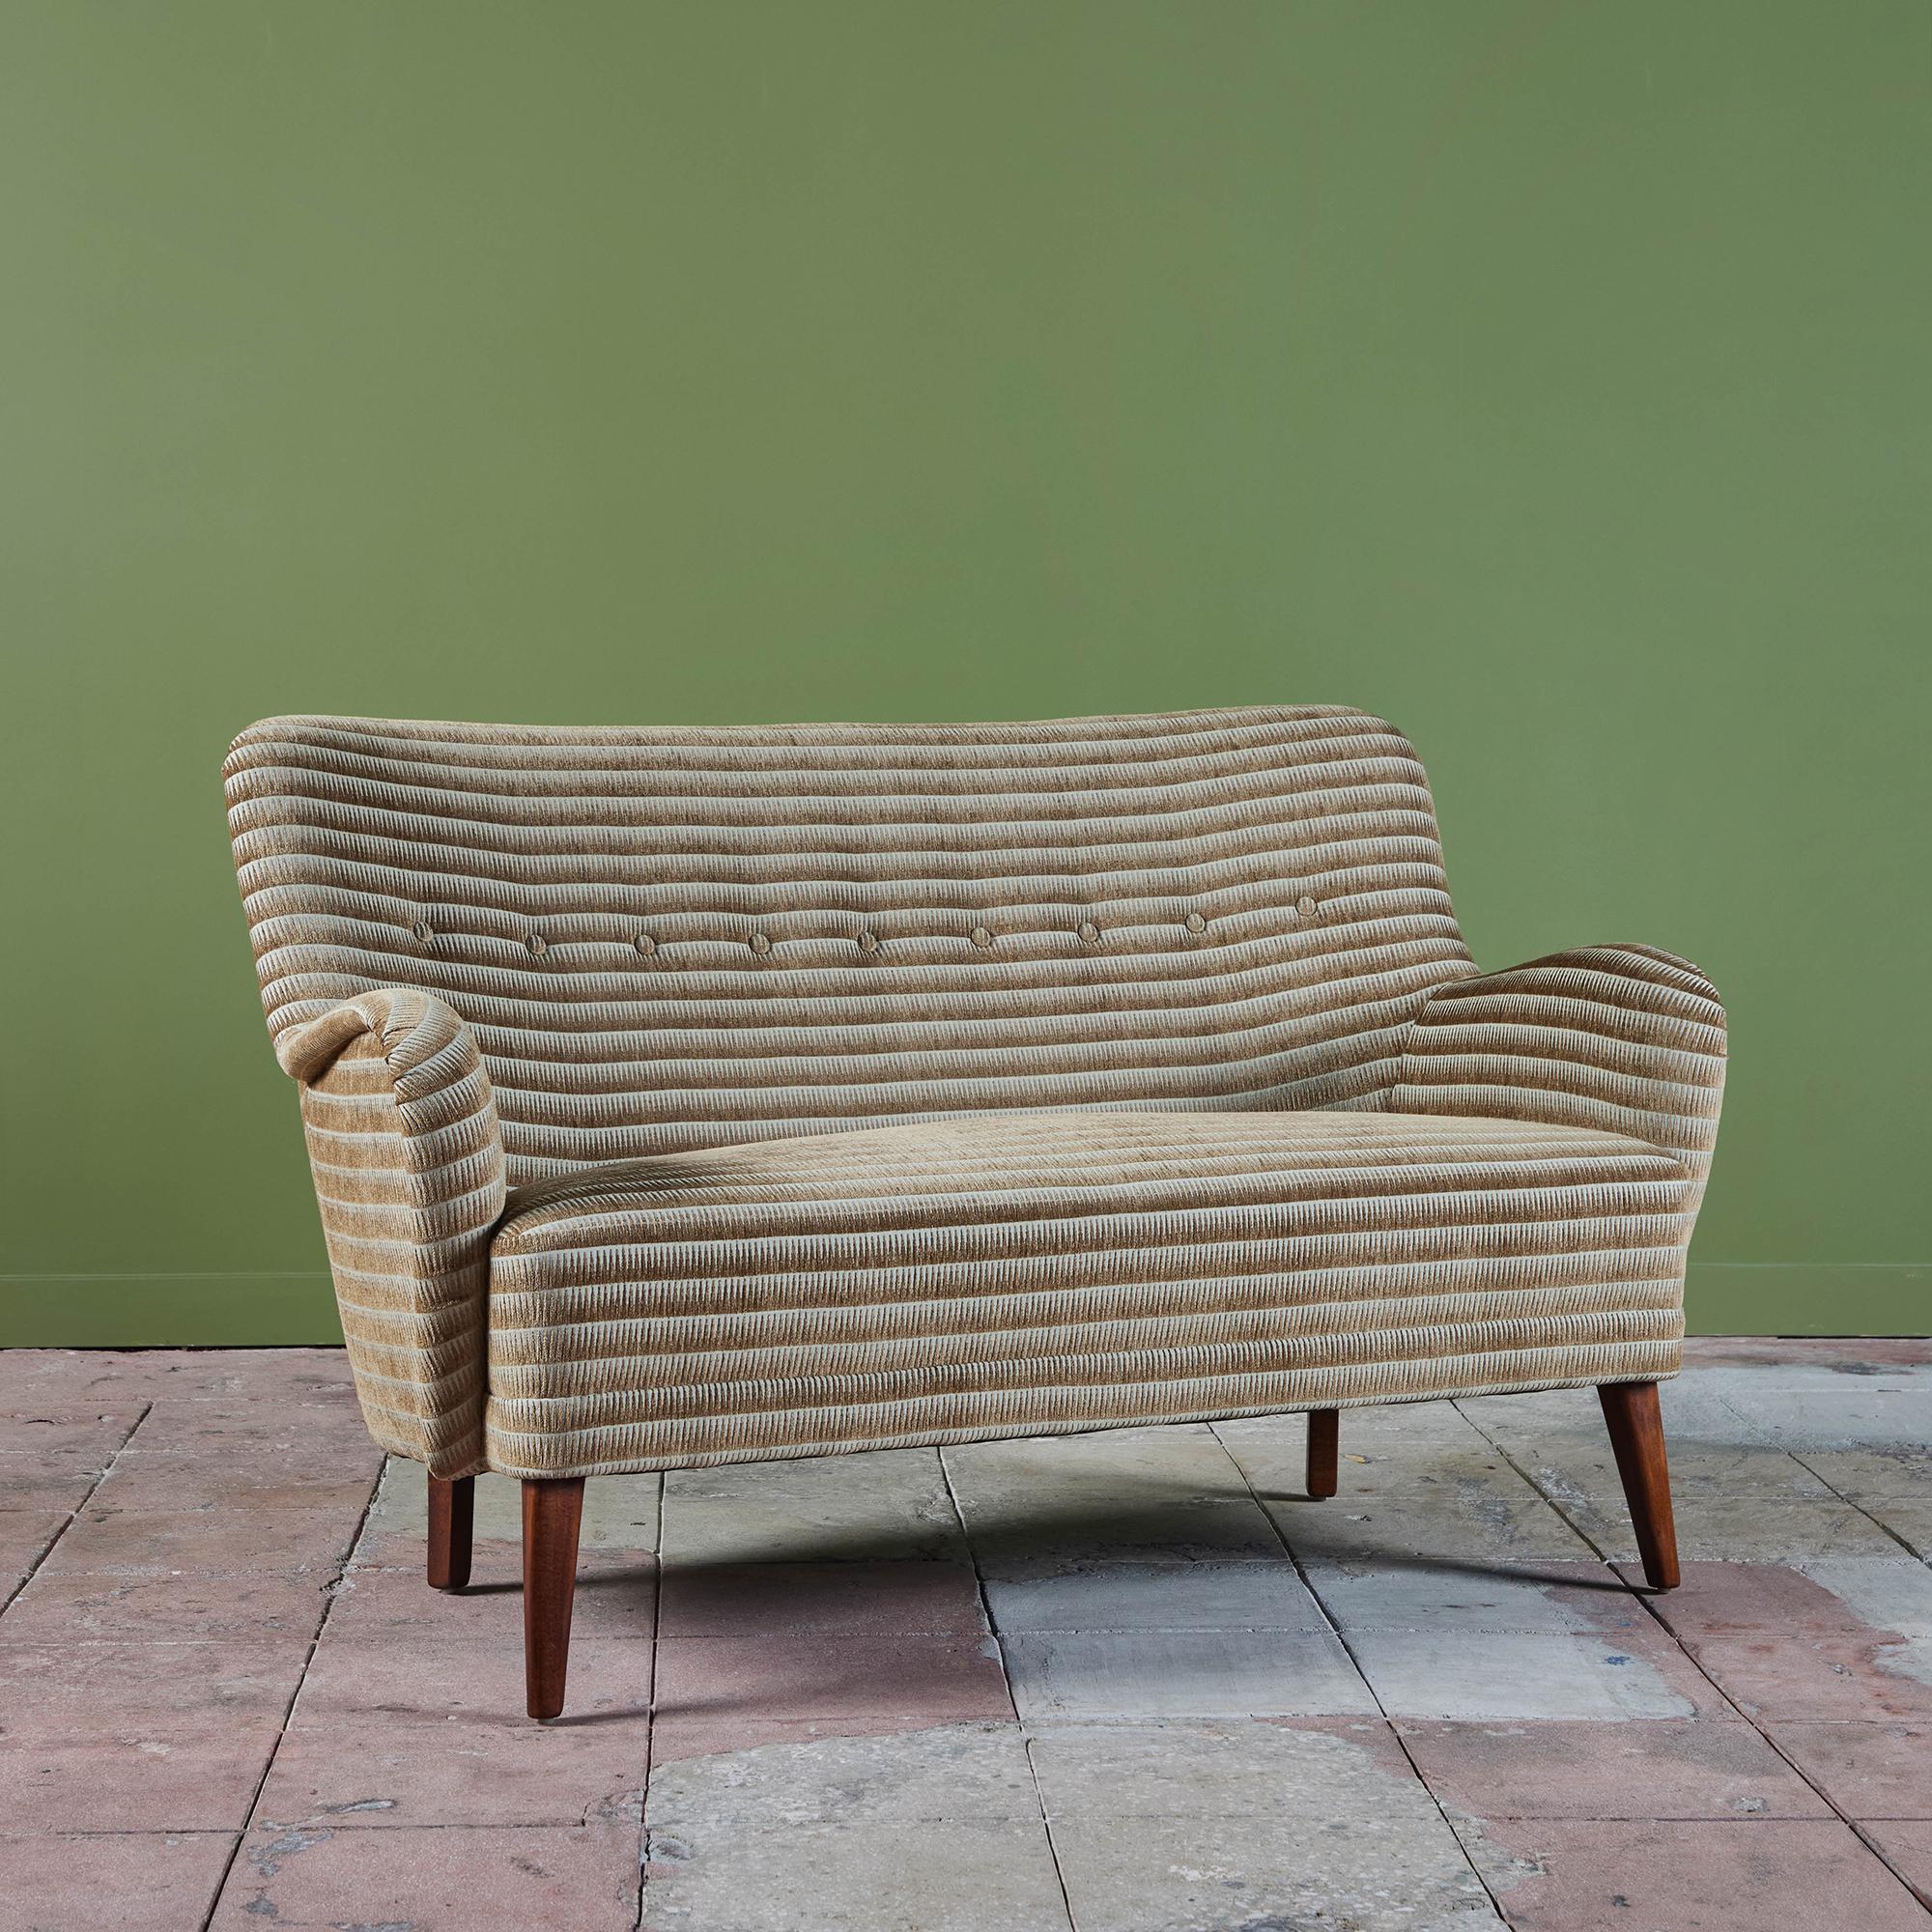 Frits Henningsen style settee in collaboration with Elizabeth Law of Elizabeth Law Design. Born and raised in South Carolina, Law draws inspiration from the discoveries of her travels and the old world. 

Newly reupholstered in a Pierre Frey fabric